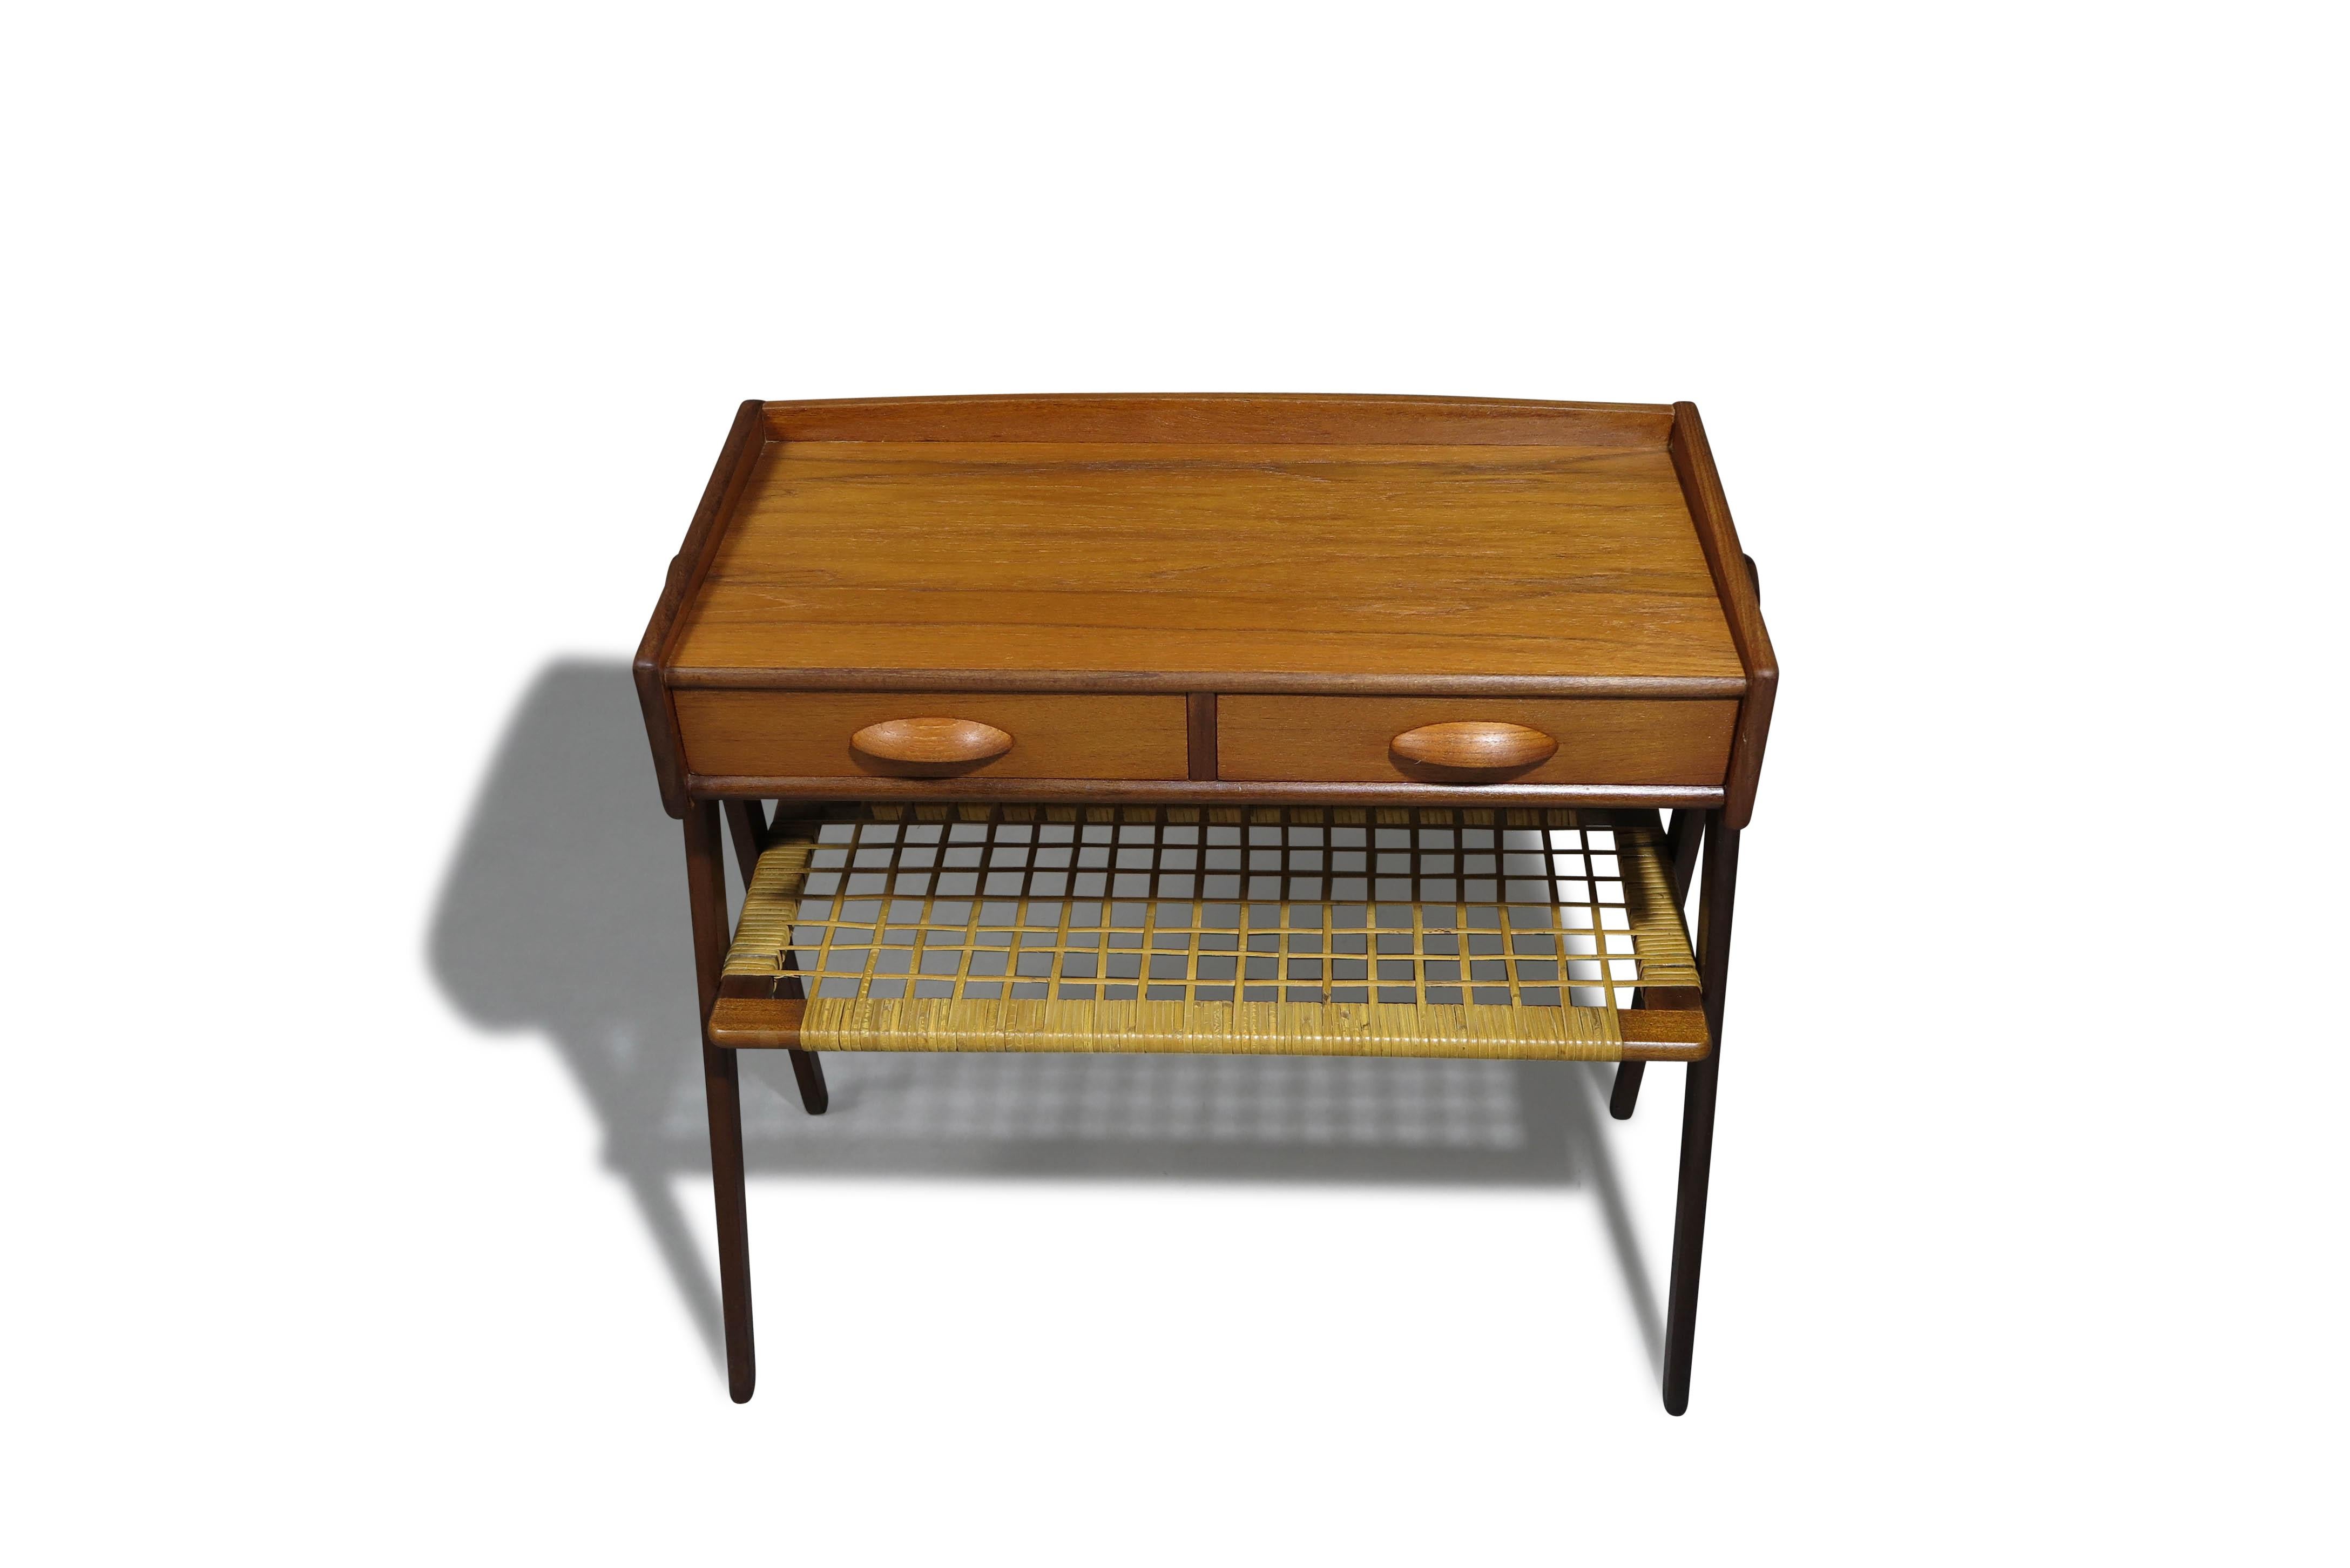 Mid-century Danish teak side table designed by Søren Rasmussen, Denmark, circa 1960s. Crafted from teak, it features two drawers with carved pulls and a woven rattan shelf. The cabinet is raised on V-shaped solid teak legs. Fully restored, it is in